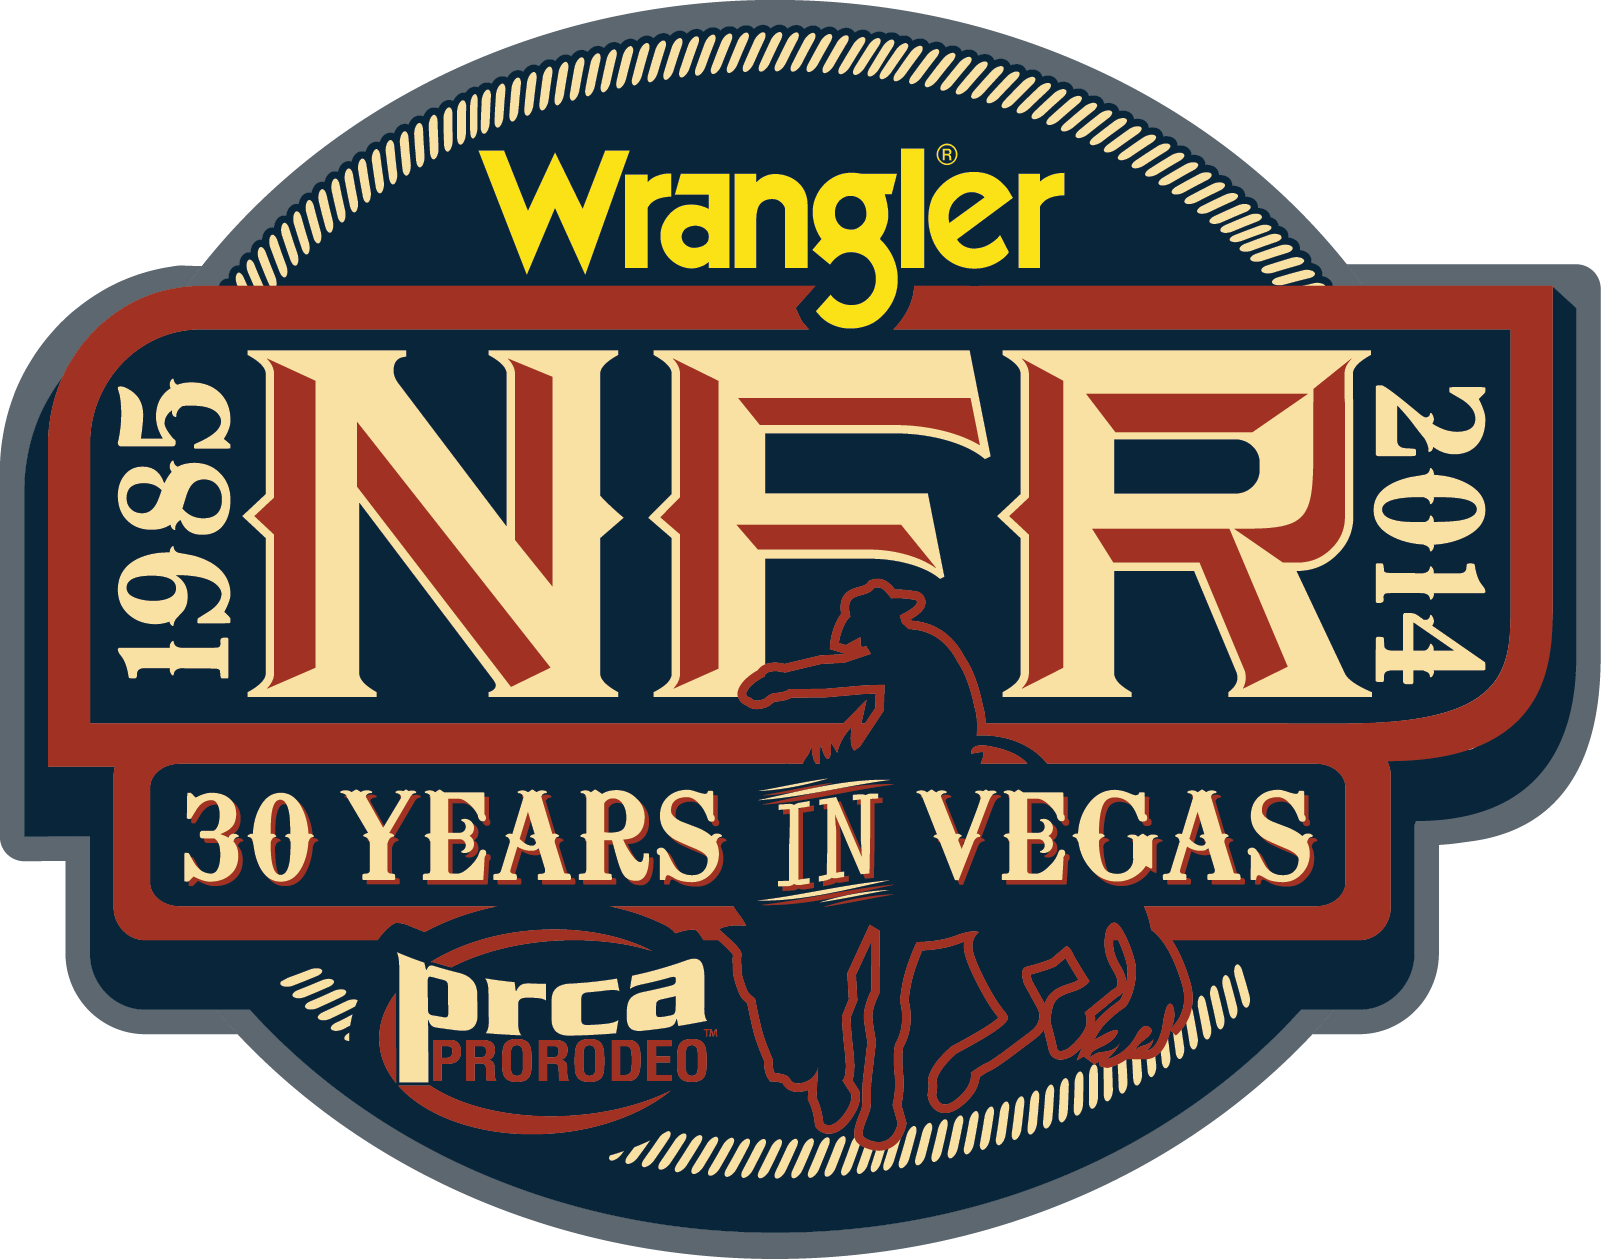 NFR Logo - Wrangler NFR 30th book becoming a reality